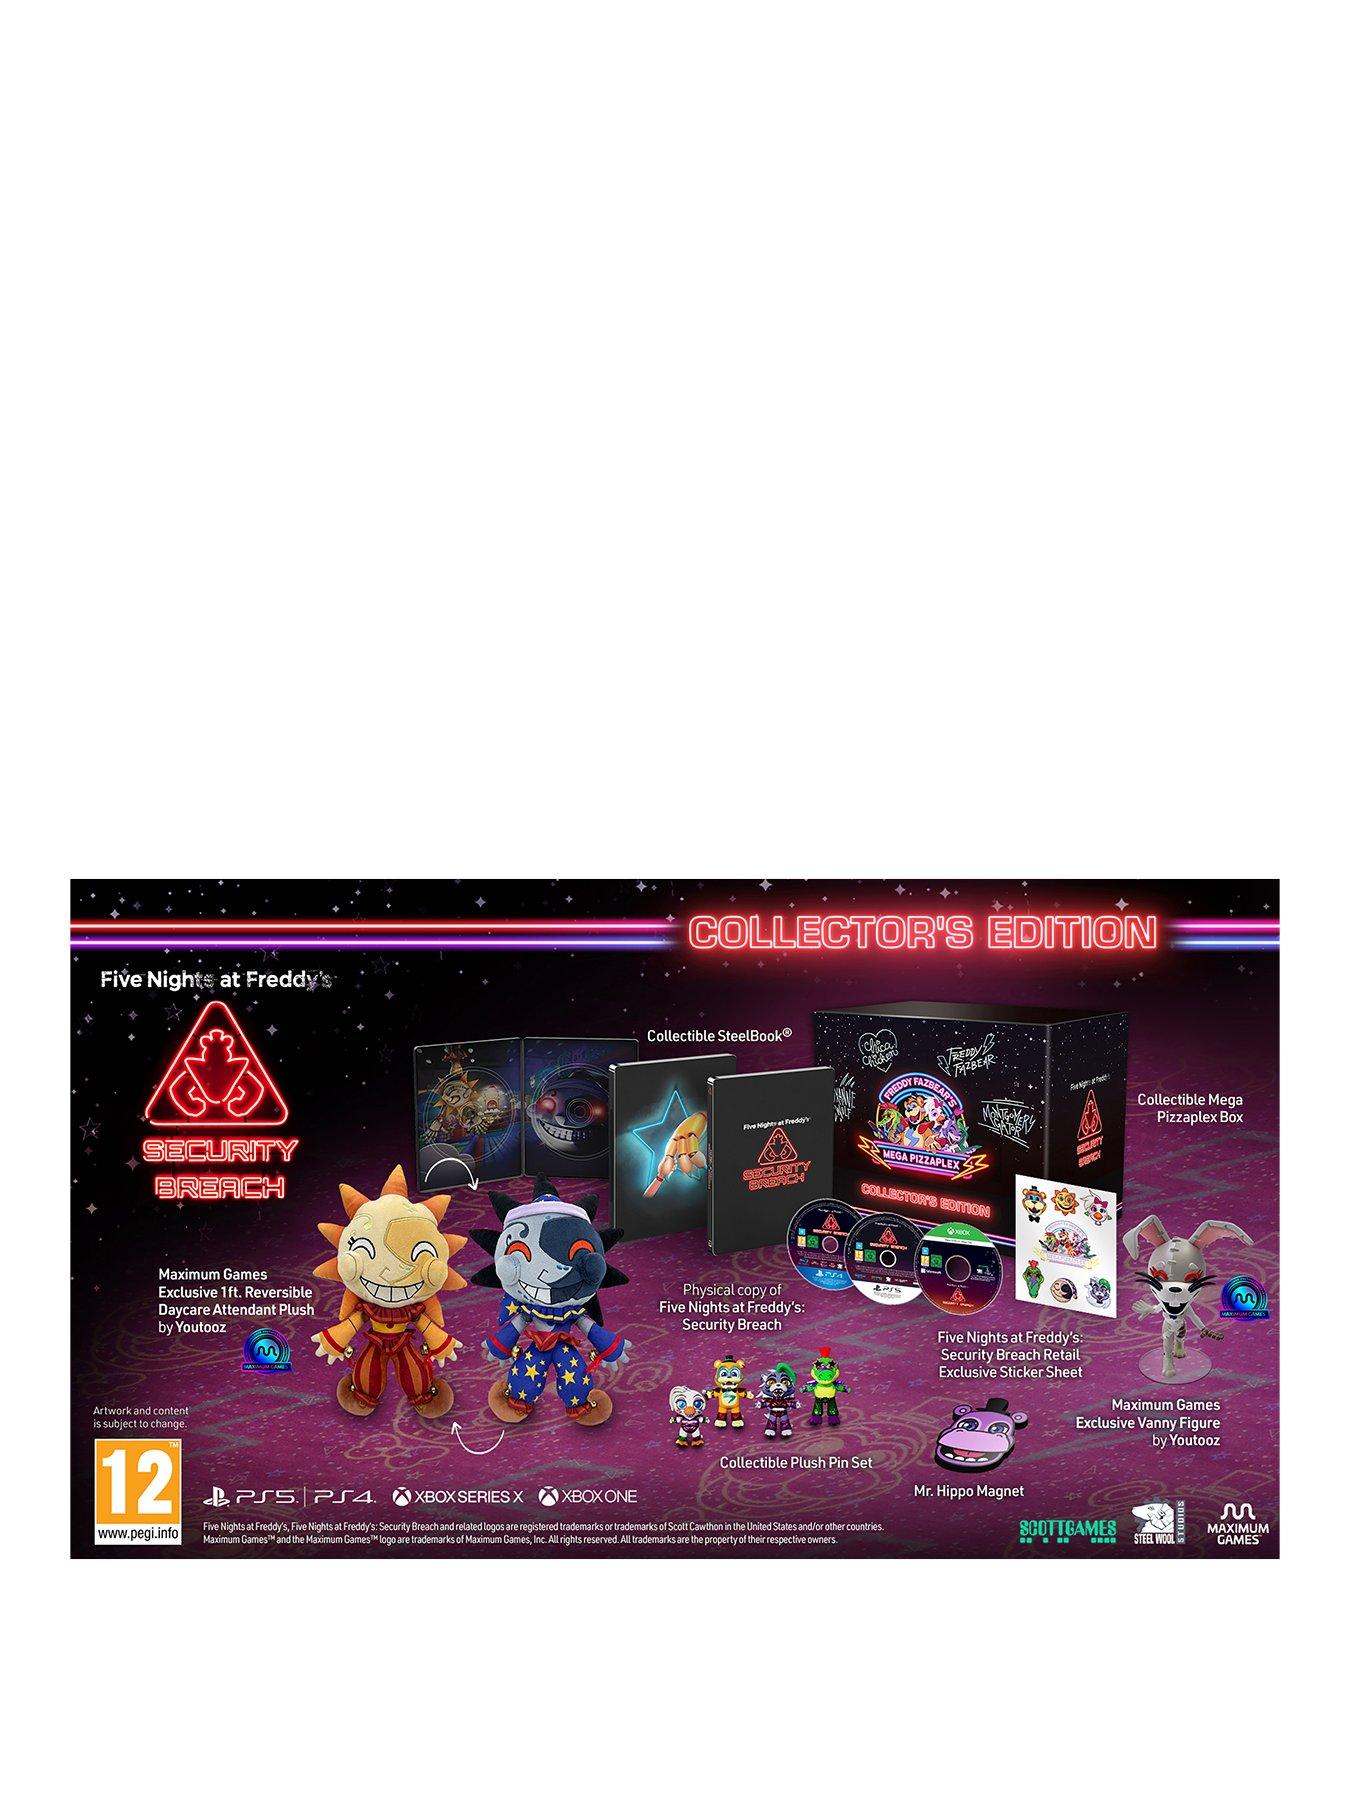 Five Nights at Freddy's: Security Breach - Sony PlayStation 4 for